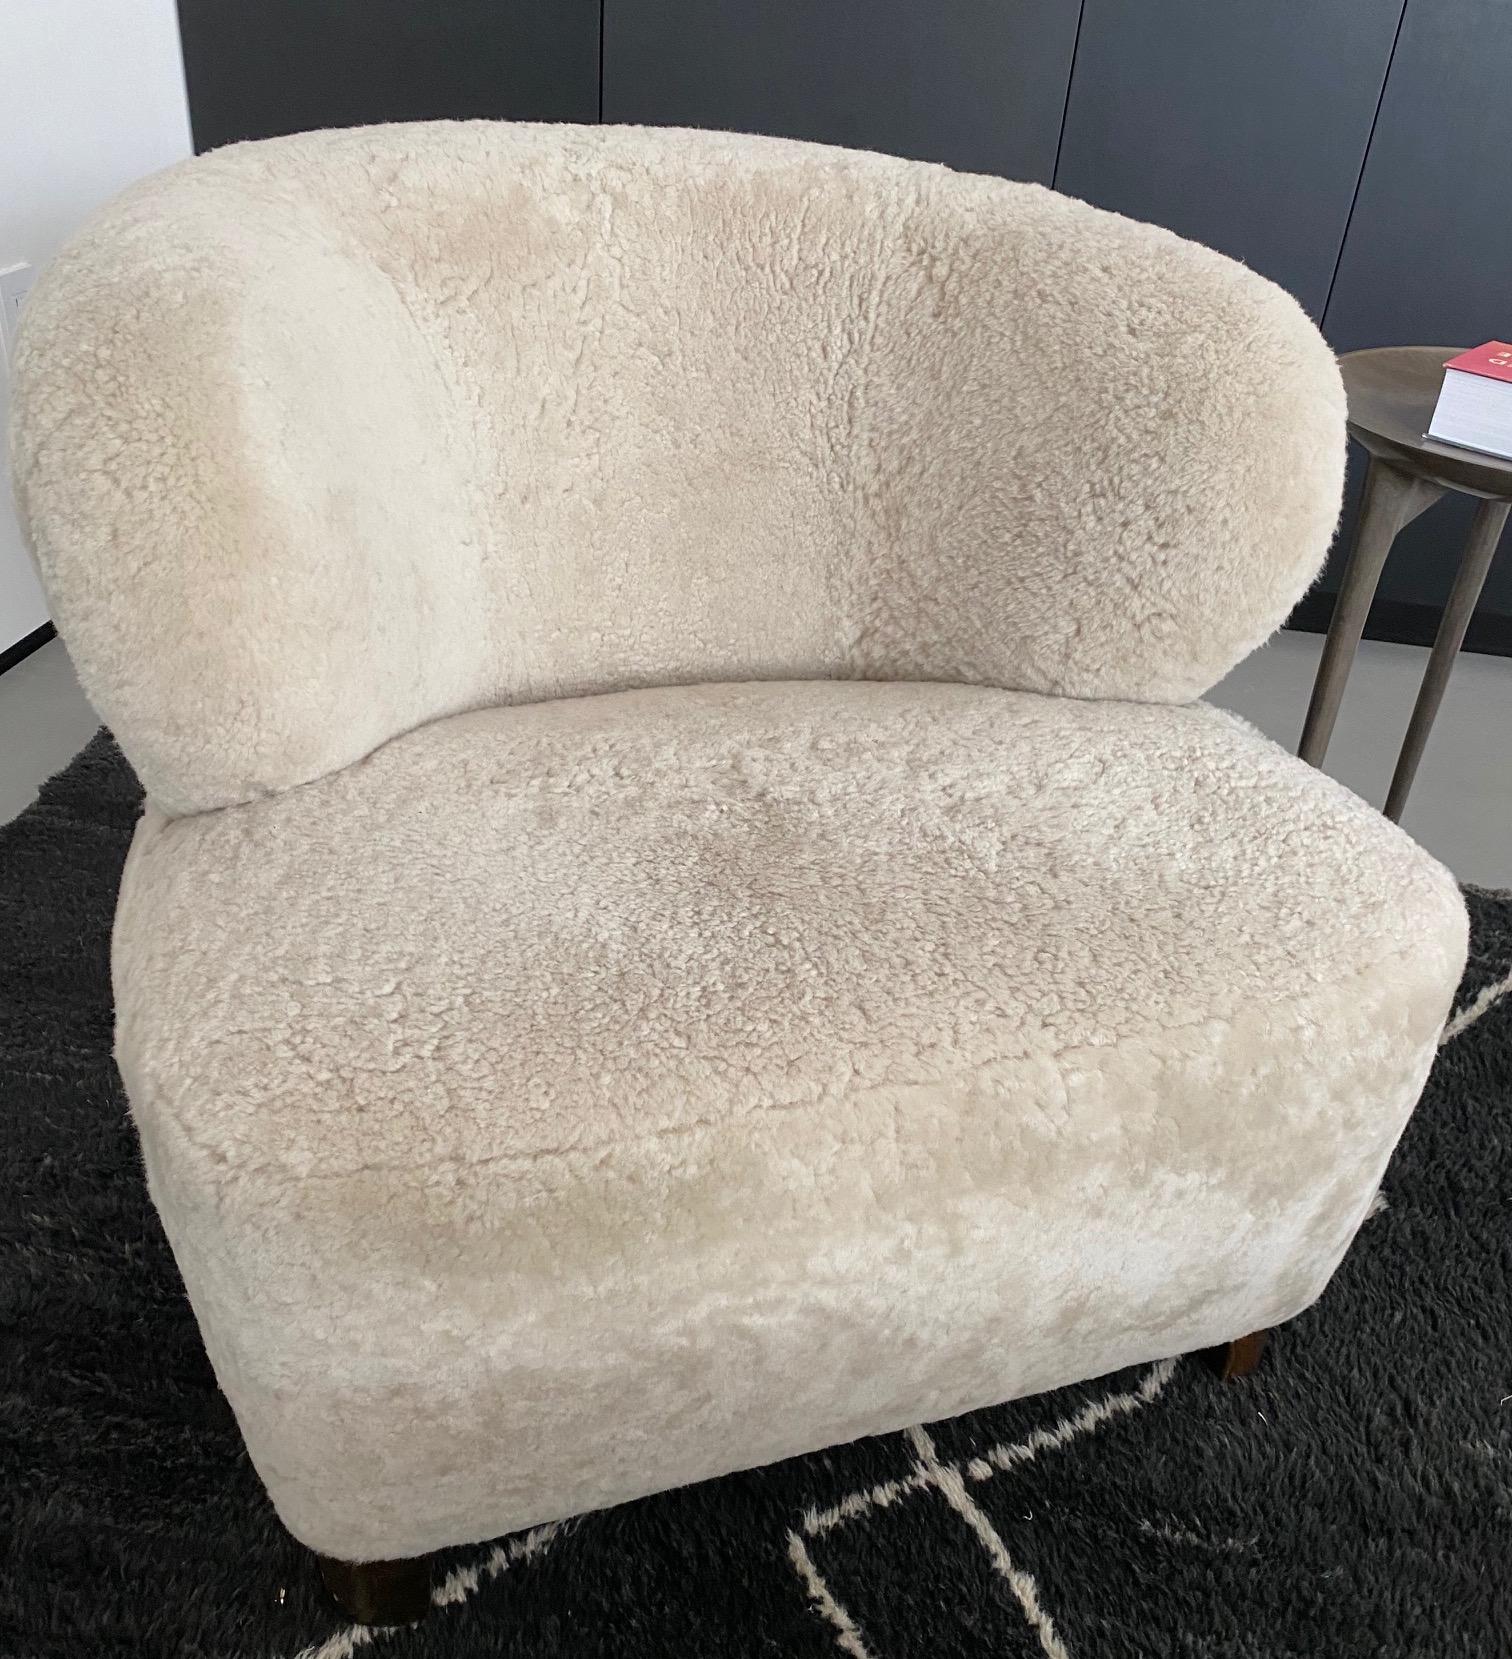 Incredibly comfortable lounge chair produced in Denmark in the 1940s.
Refurbished in 2019 and reupholstered in high quality cream shearling.